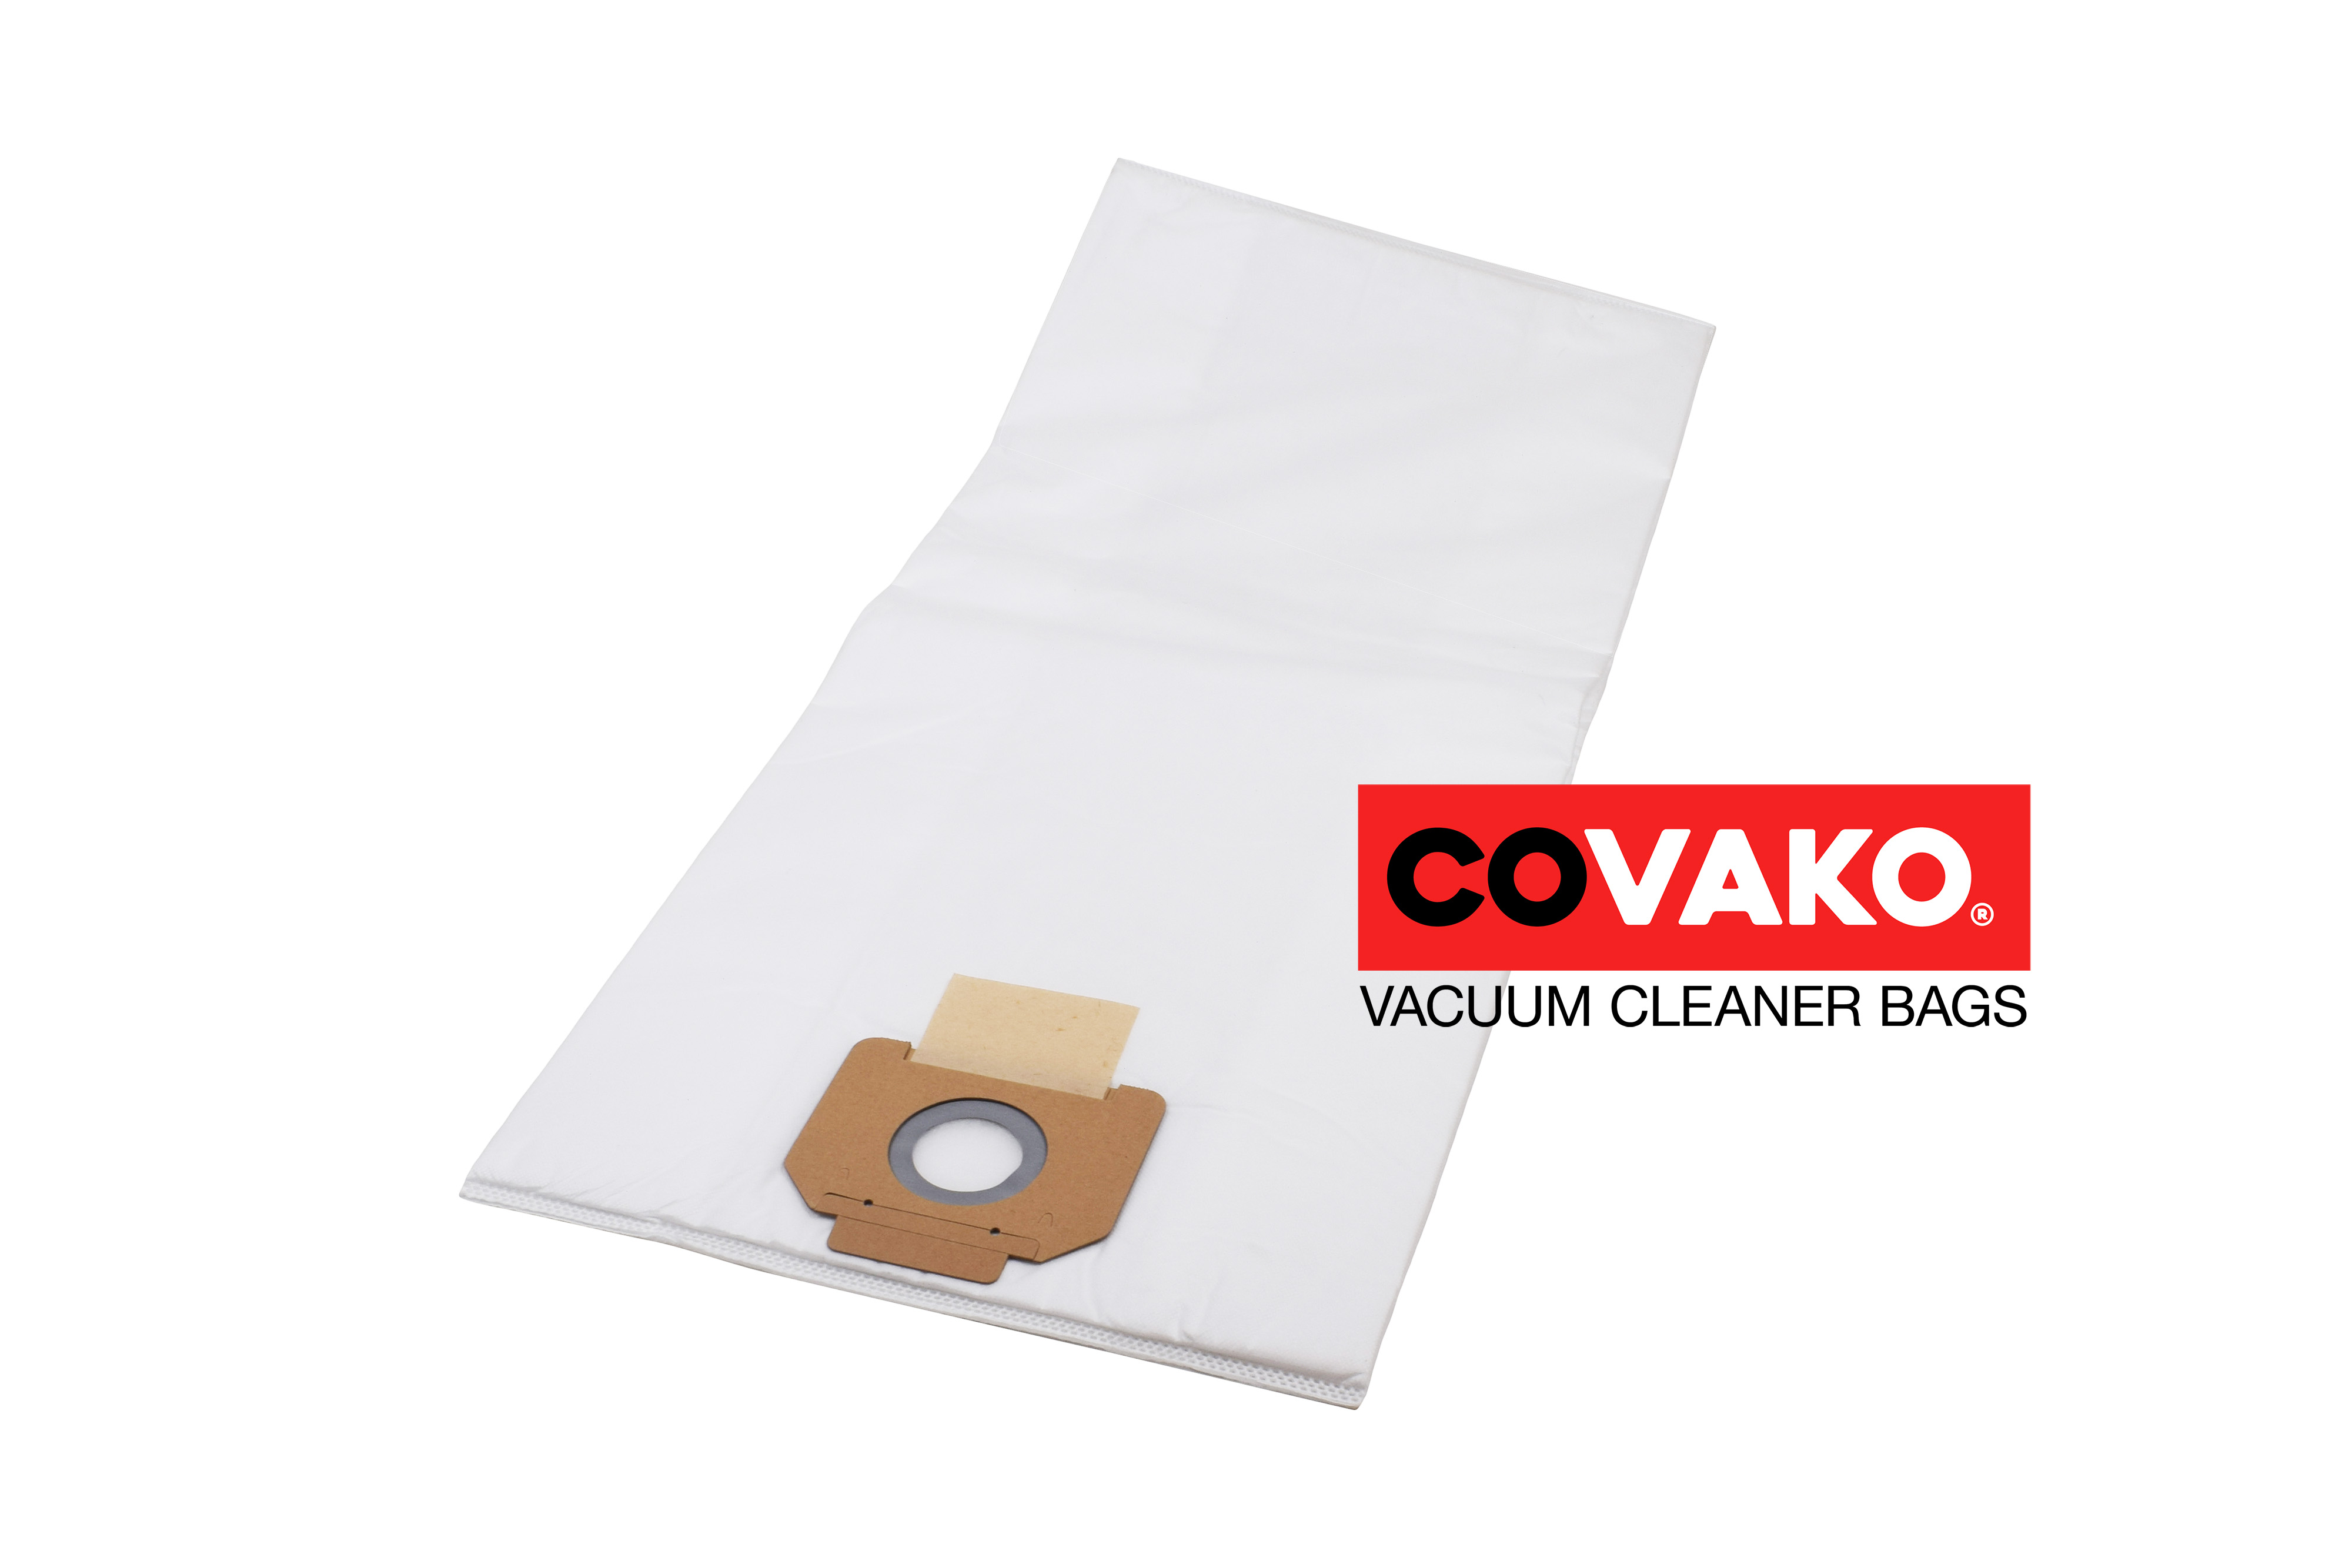 Cleancraft flexCat 290 EPT / Synthesis - Cleancraft vacuum cleaner bags